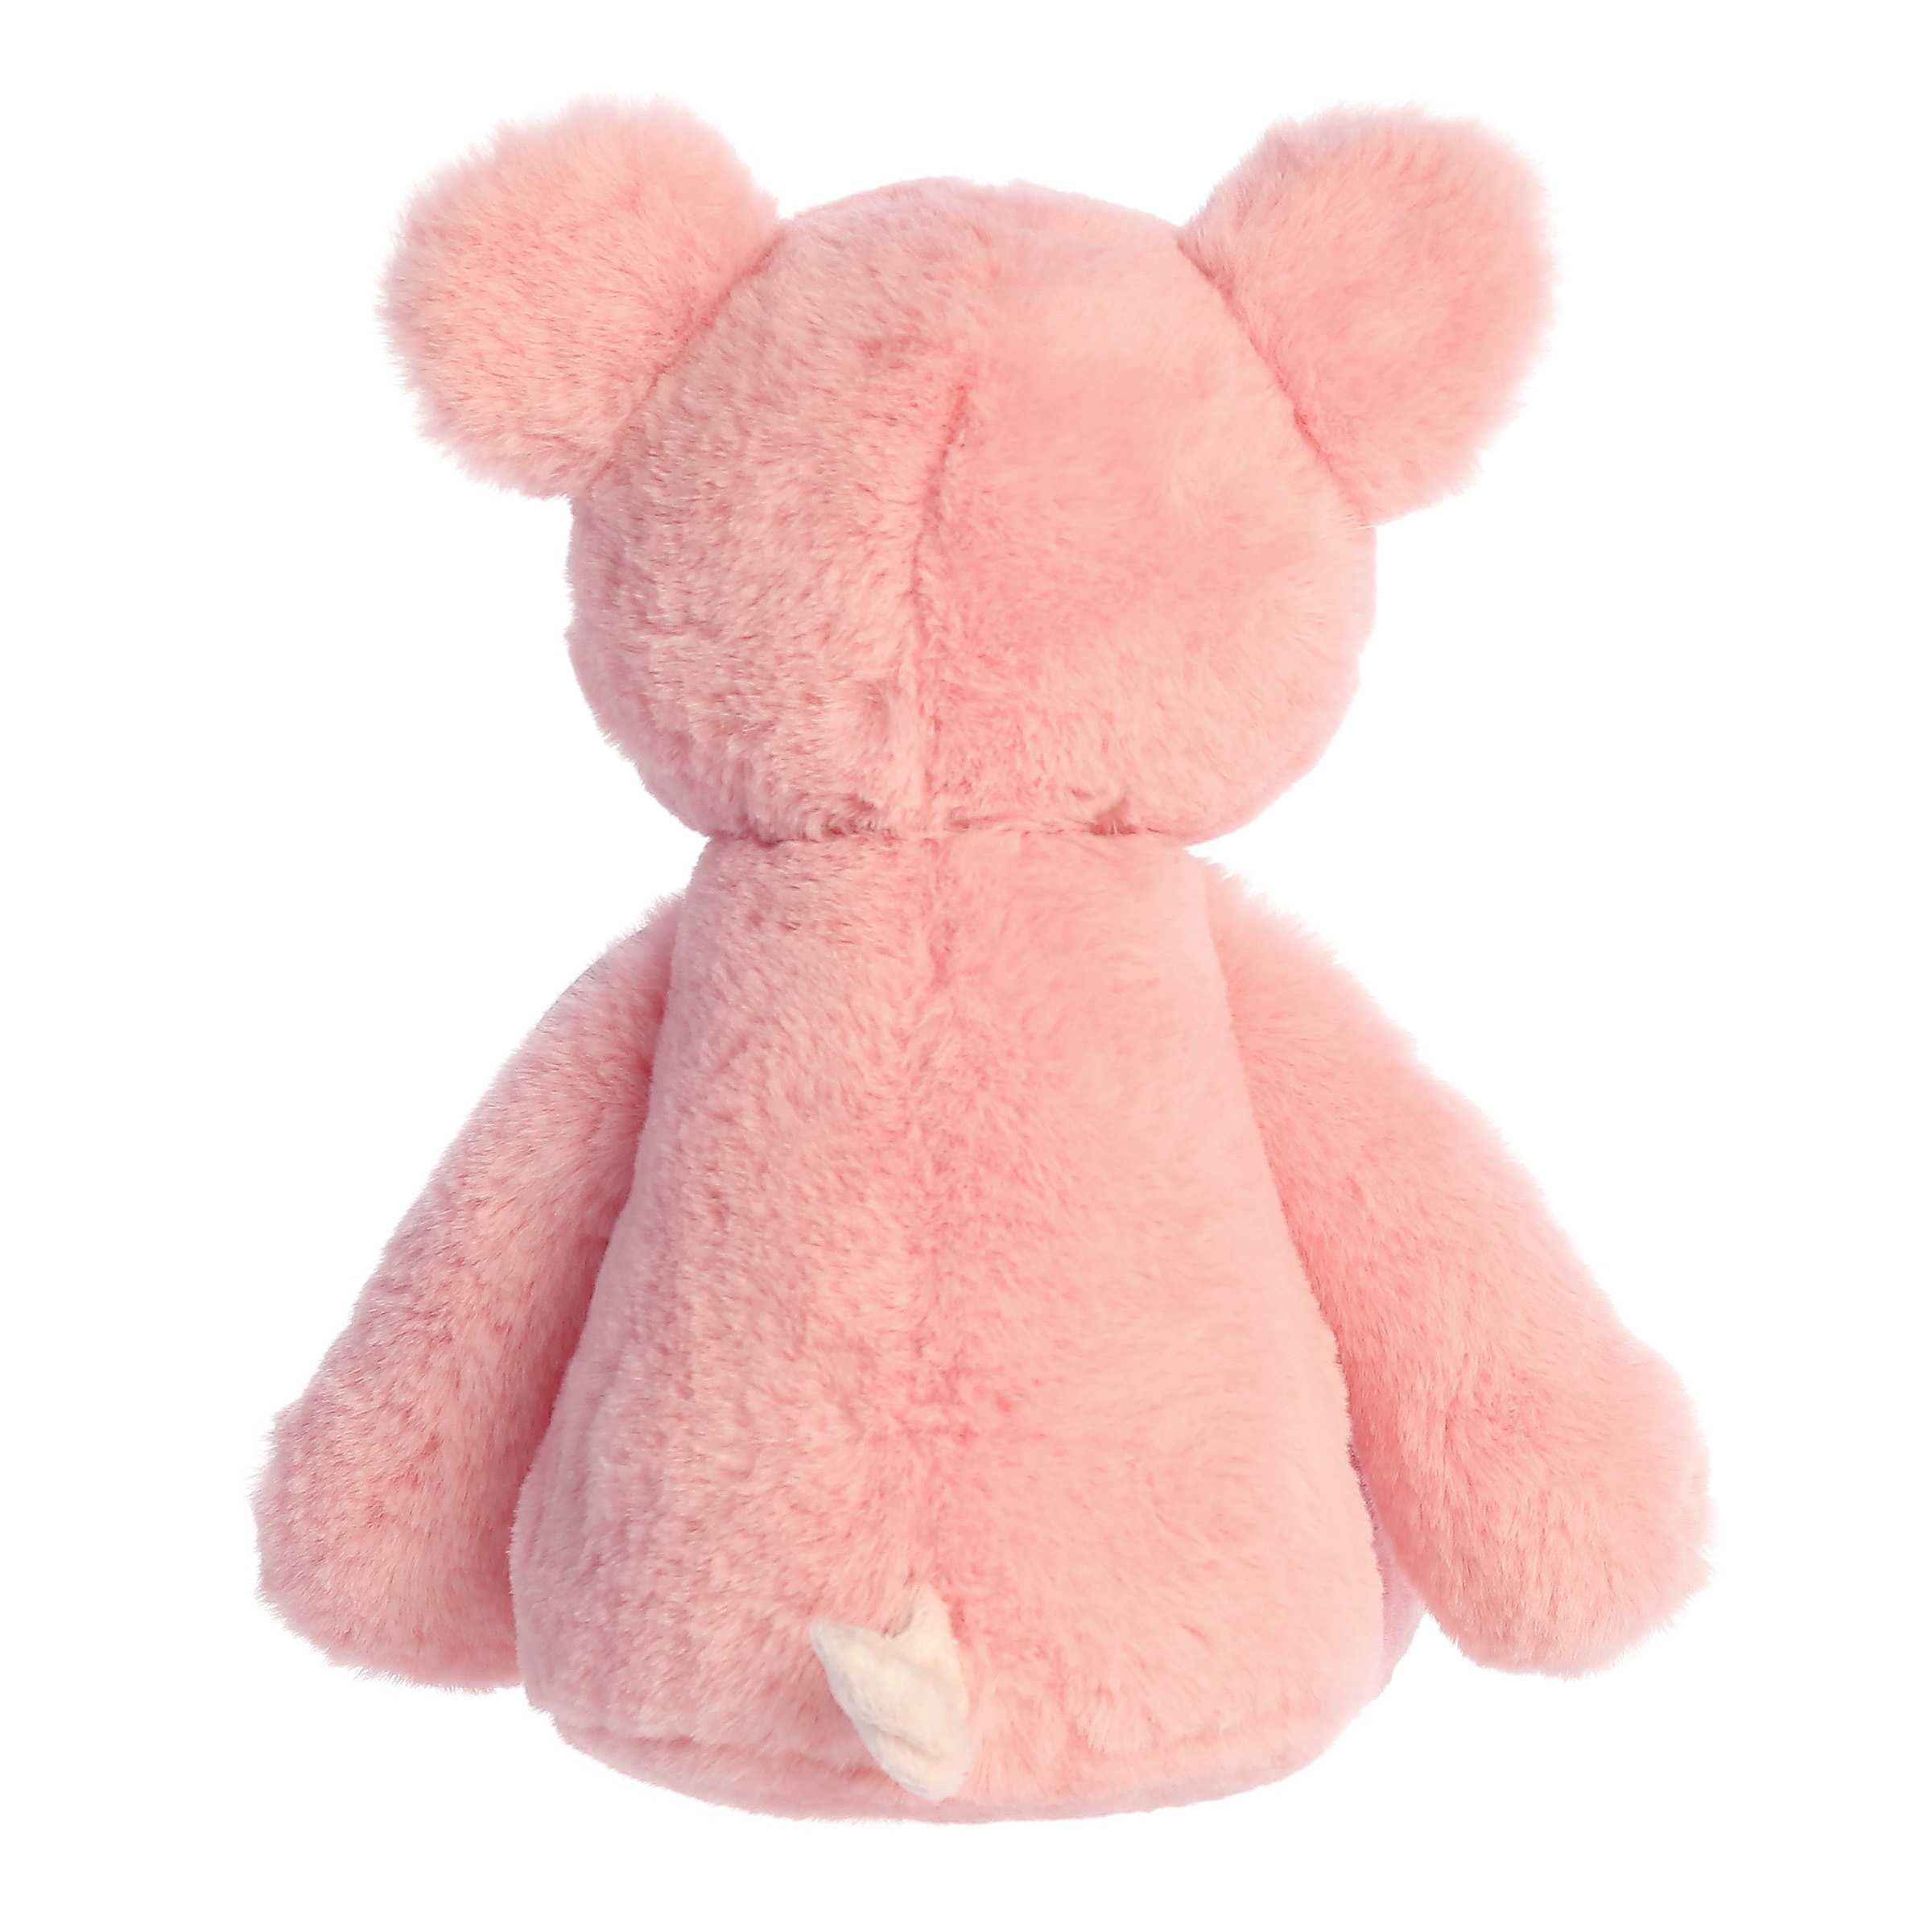 ebba™ - Eco Ebba™ - 12.5" Piglet